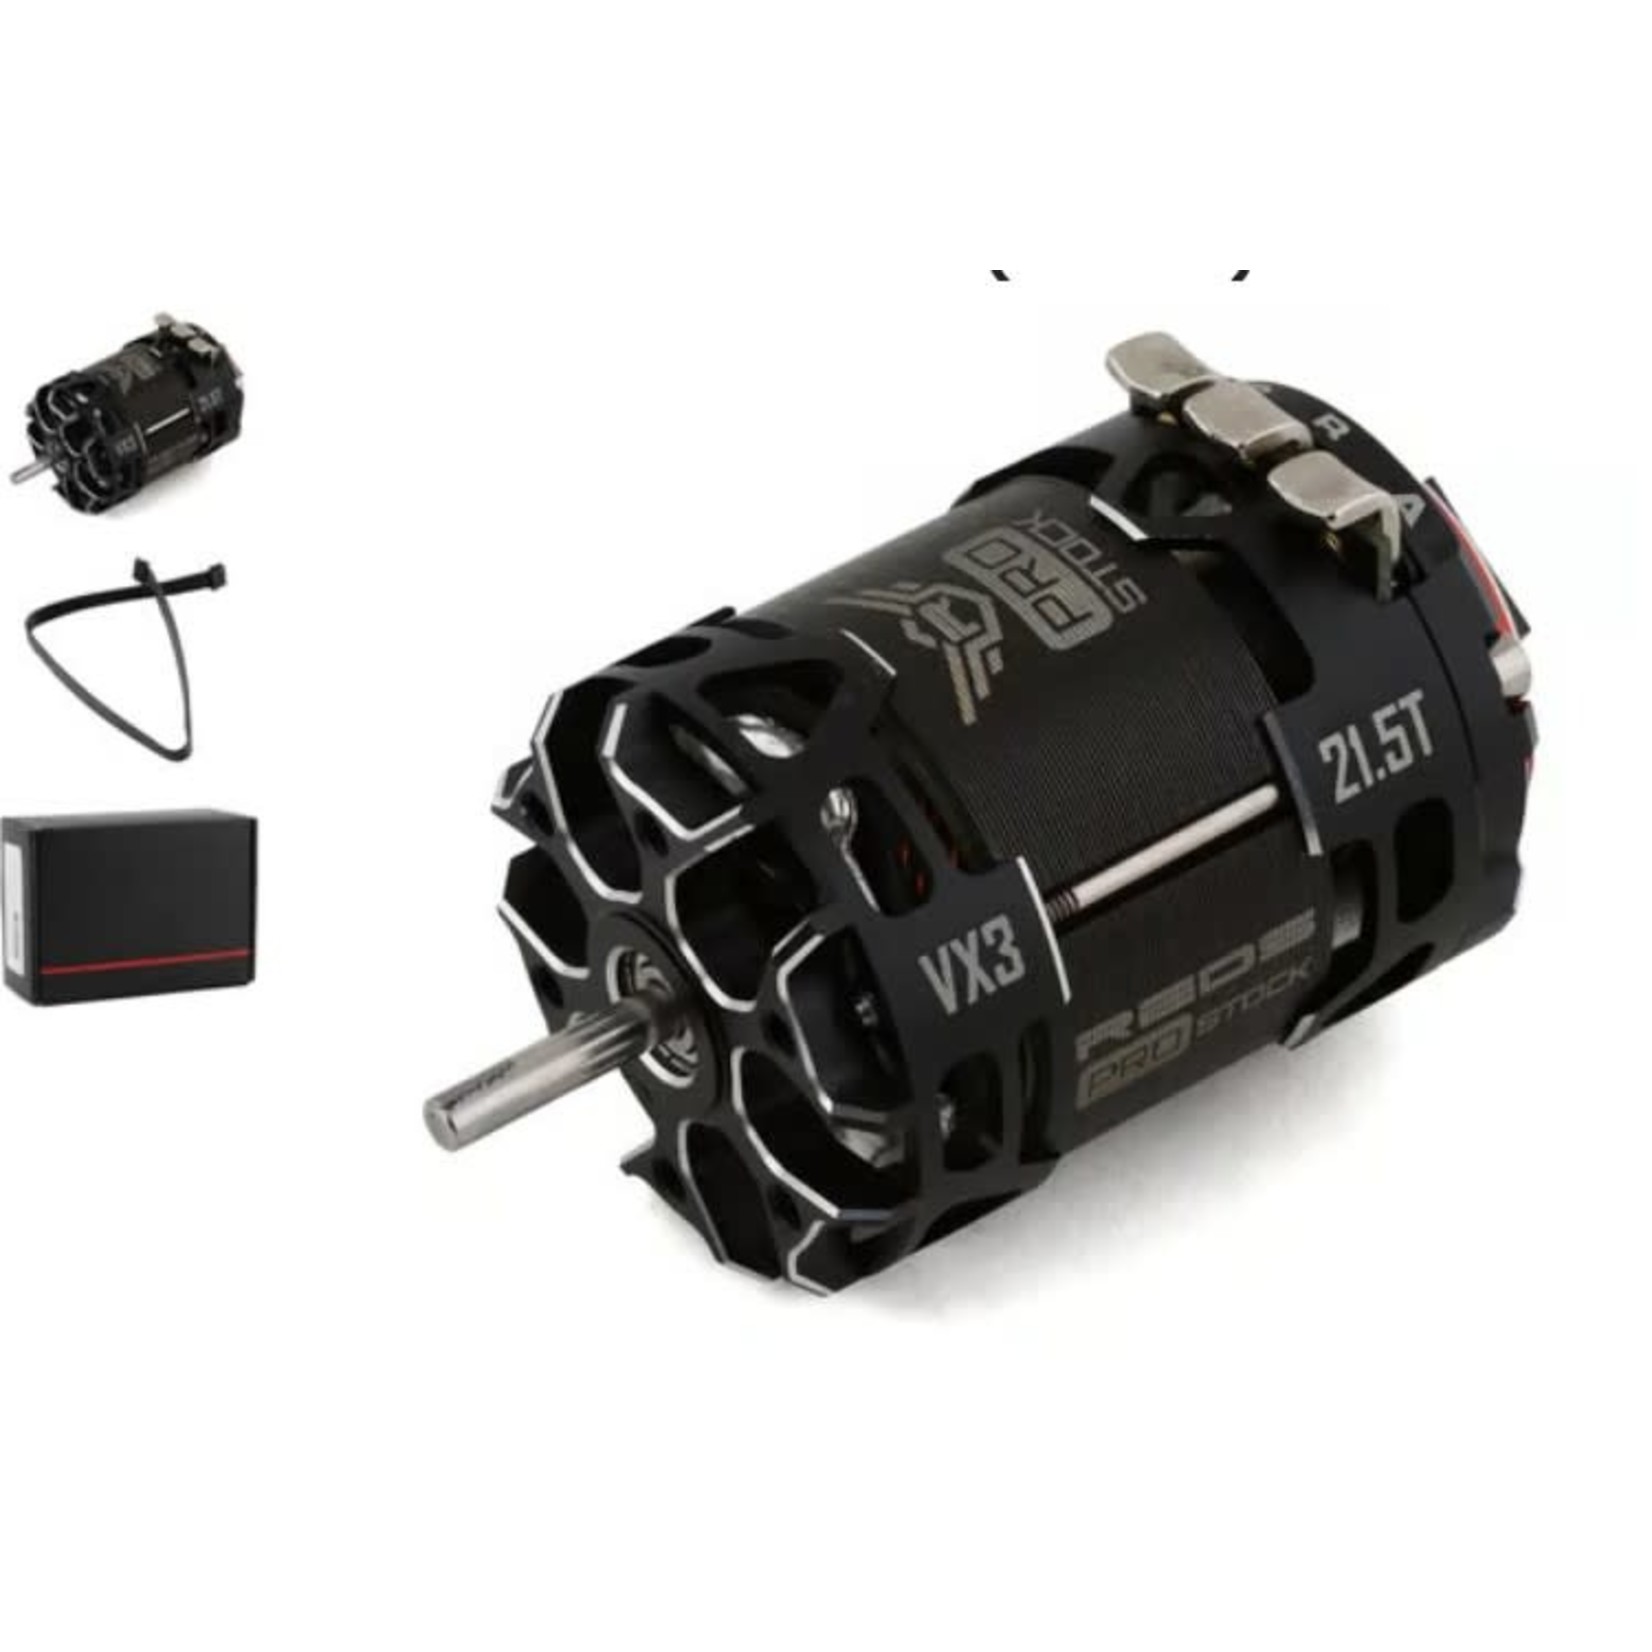 REDS REDS VX3 Pro Stock 540 "Factory Selected" Sensored Brushless Motor (21.5T)